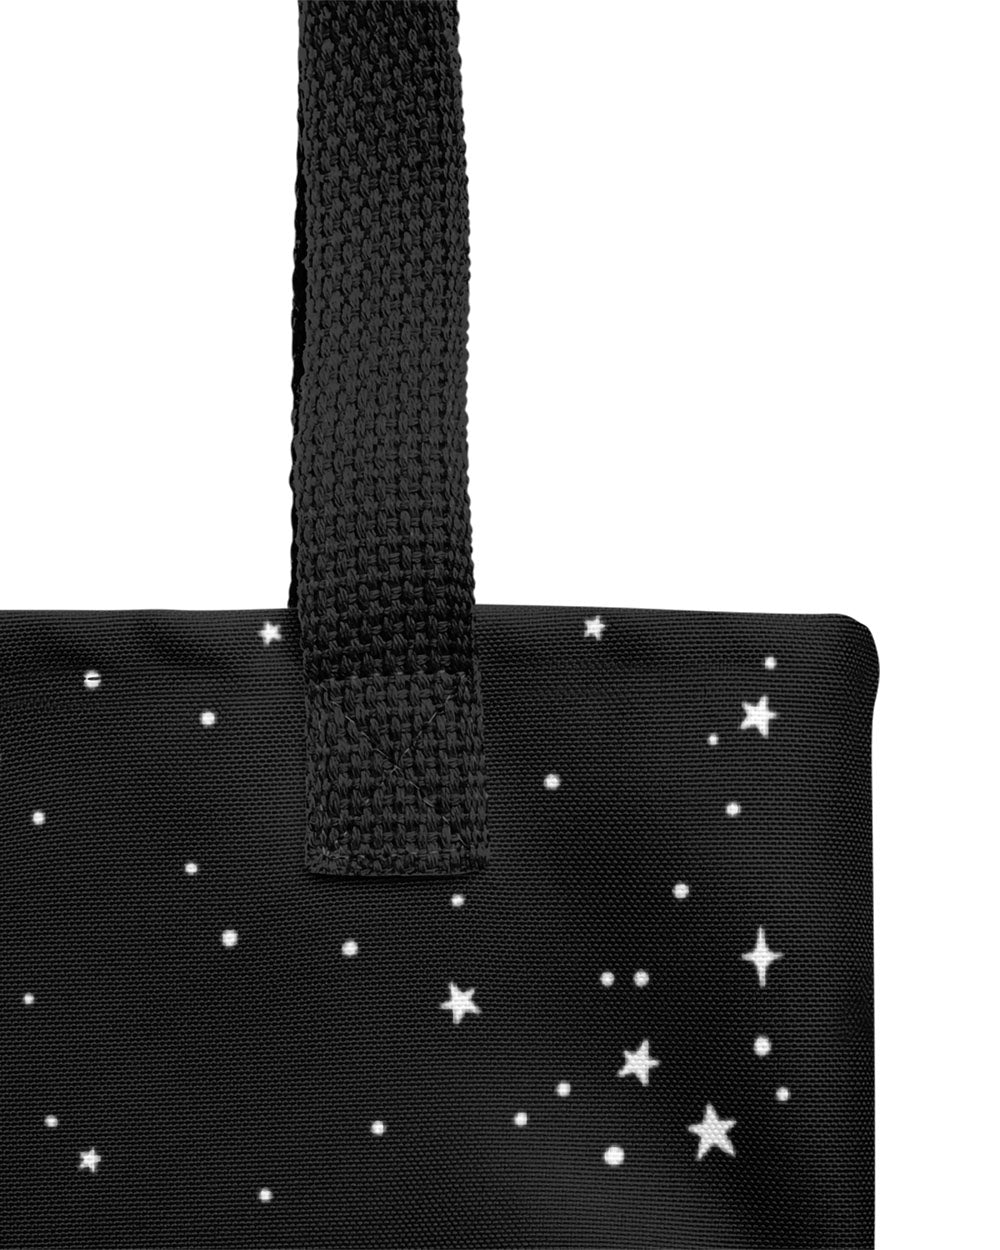 Astral Tote Bag - Sun & Moon Dark Academia Witchy Goth Style - Grunge Aesthetic Bag - On-Demand Sustainable Alt Accessories